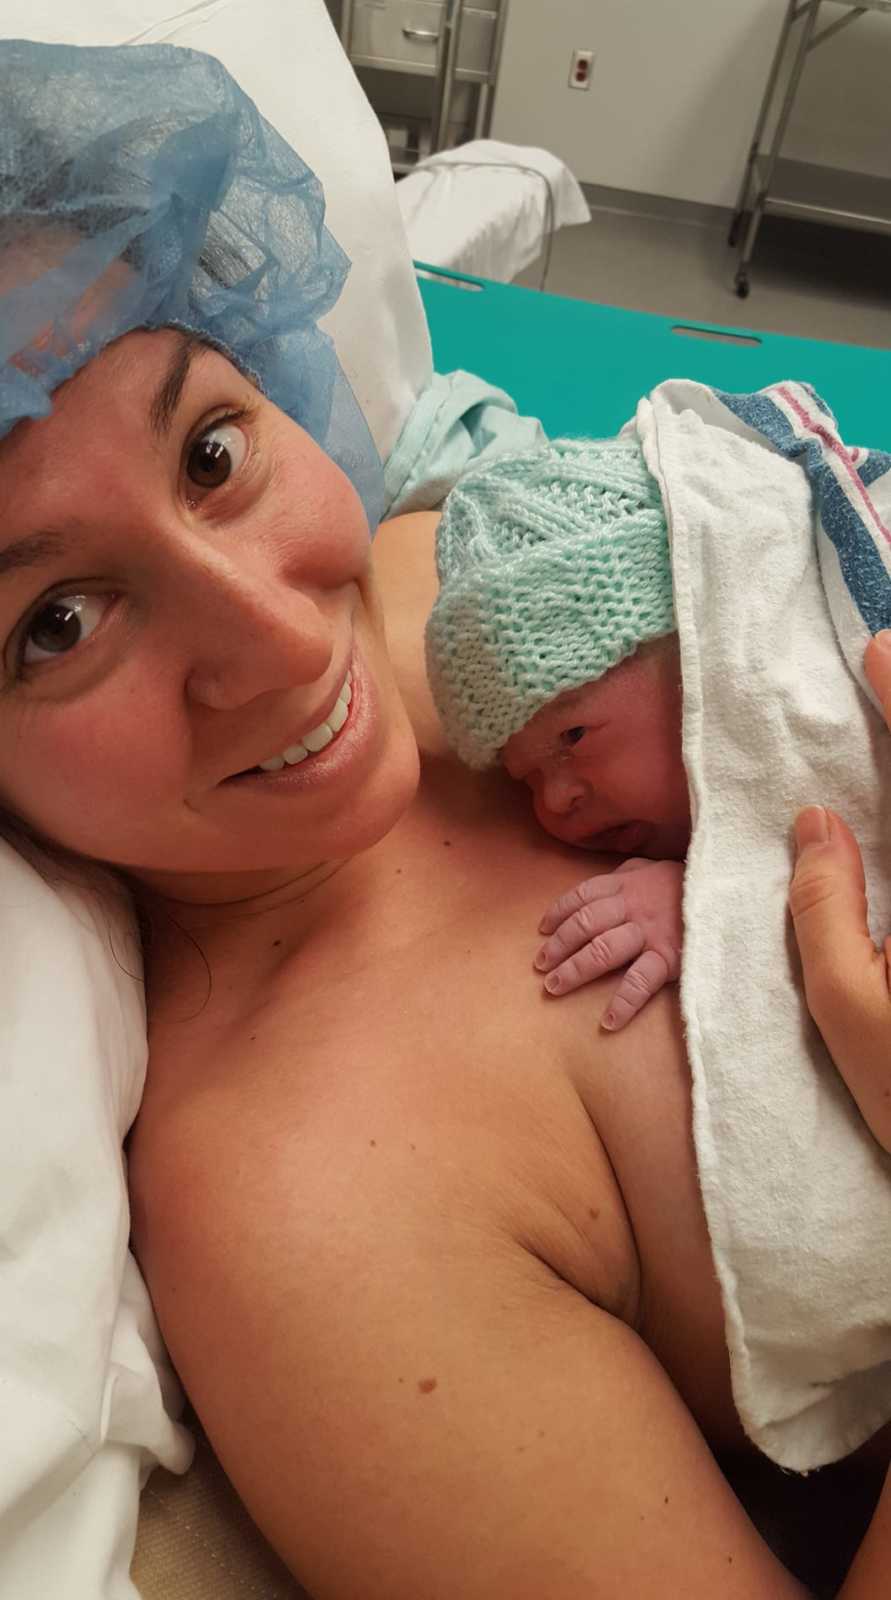 Woman who just gave birth laying with newborn on her bare chest